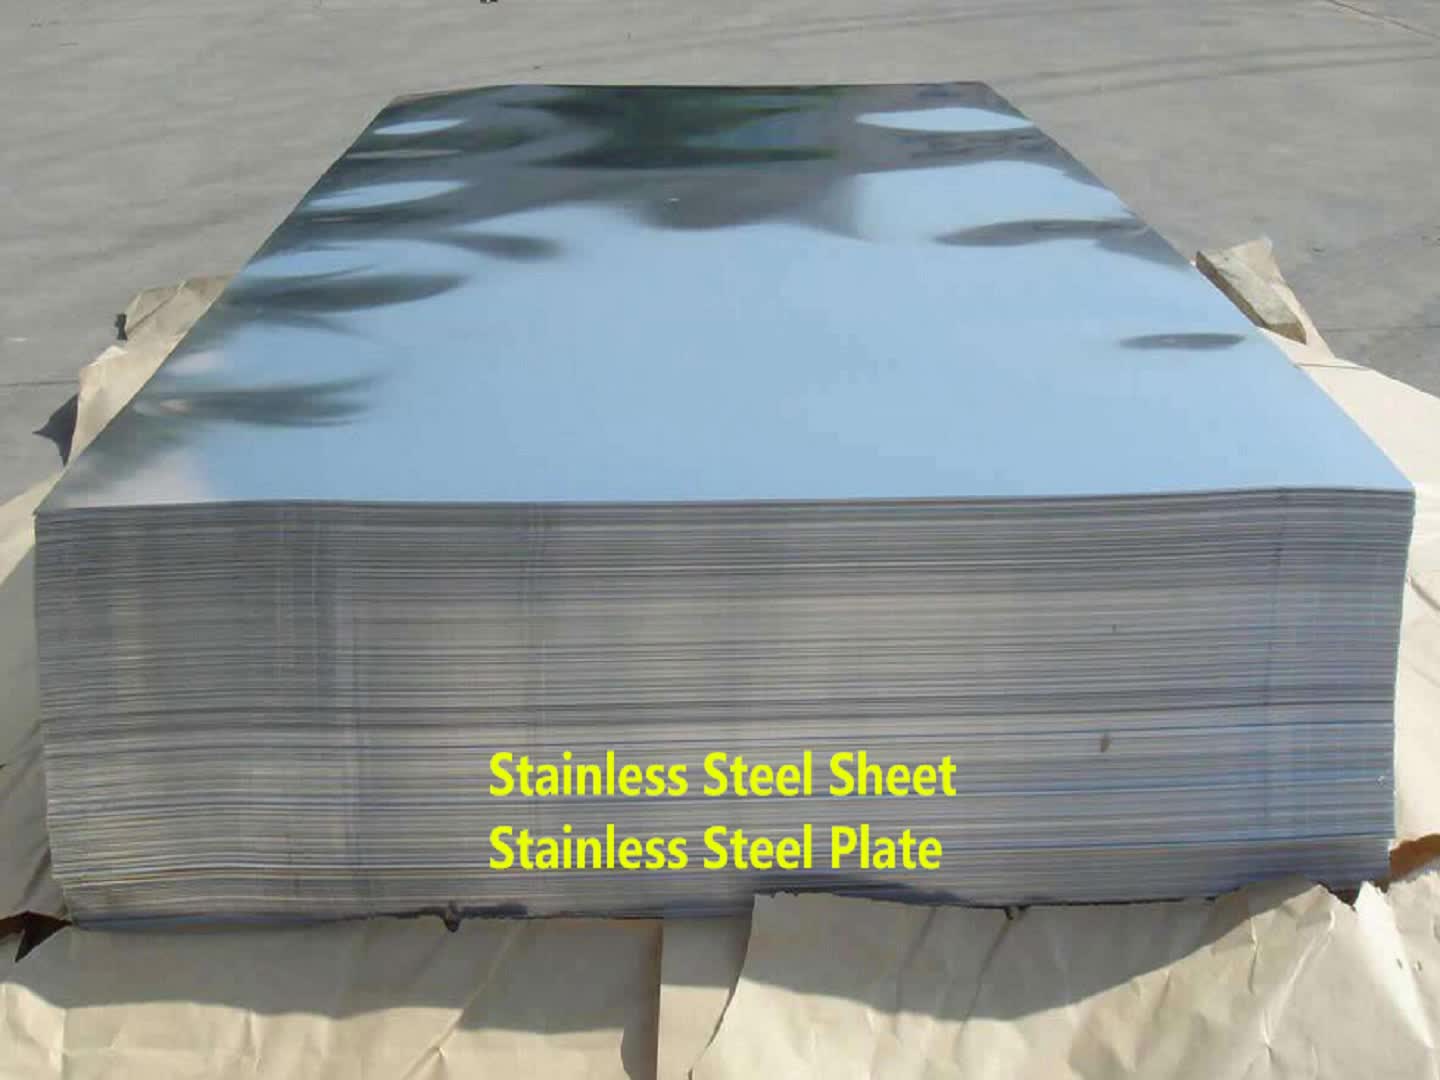 409 410 420 430 Stainless Steel Sheet Plate Price Buy 420 430 Stainless Steel Sheet Price,409